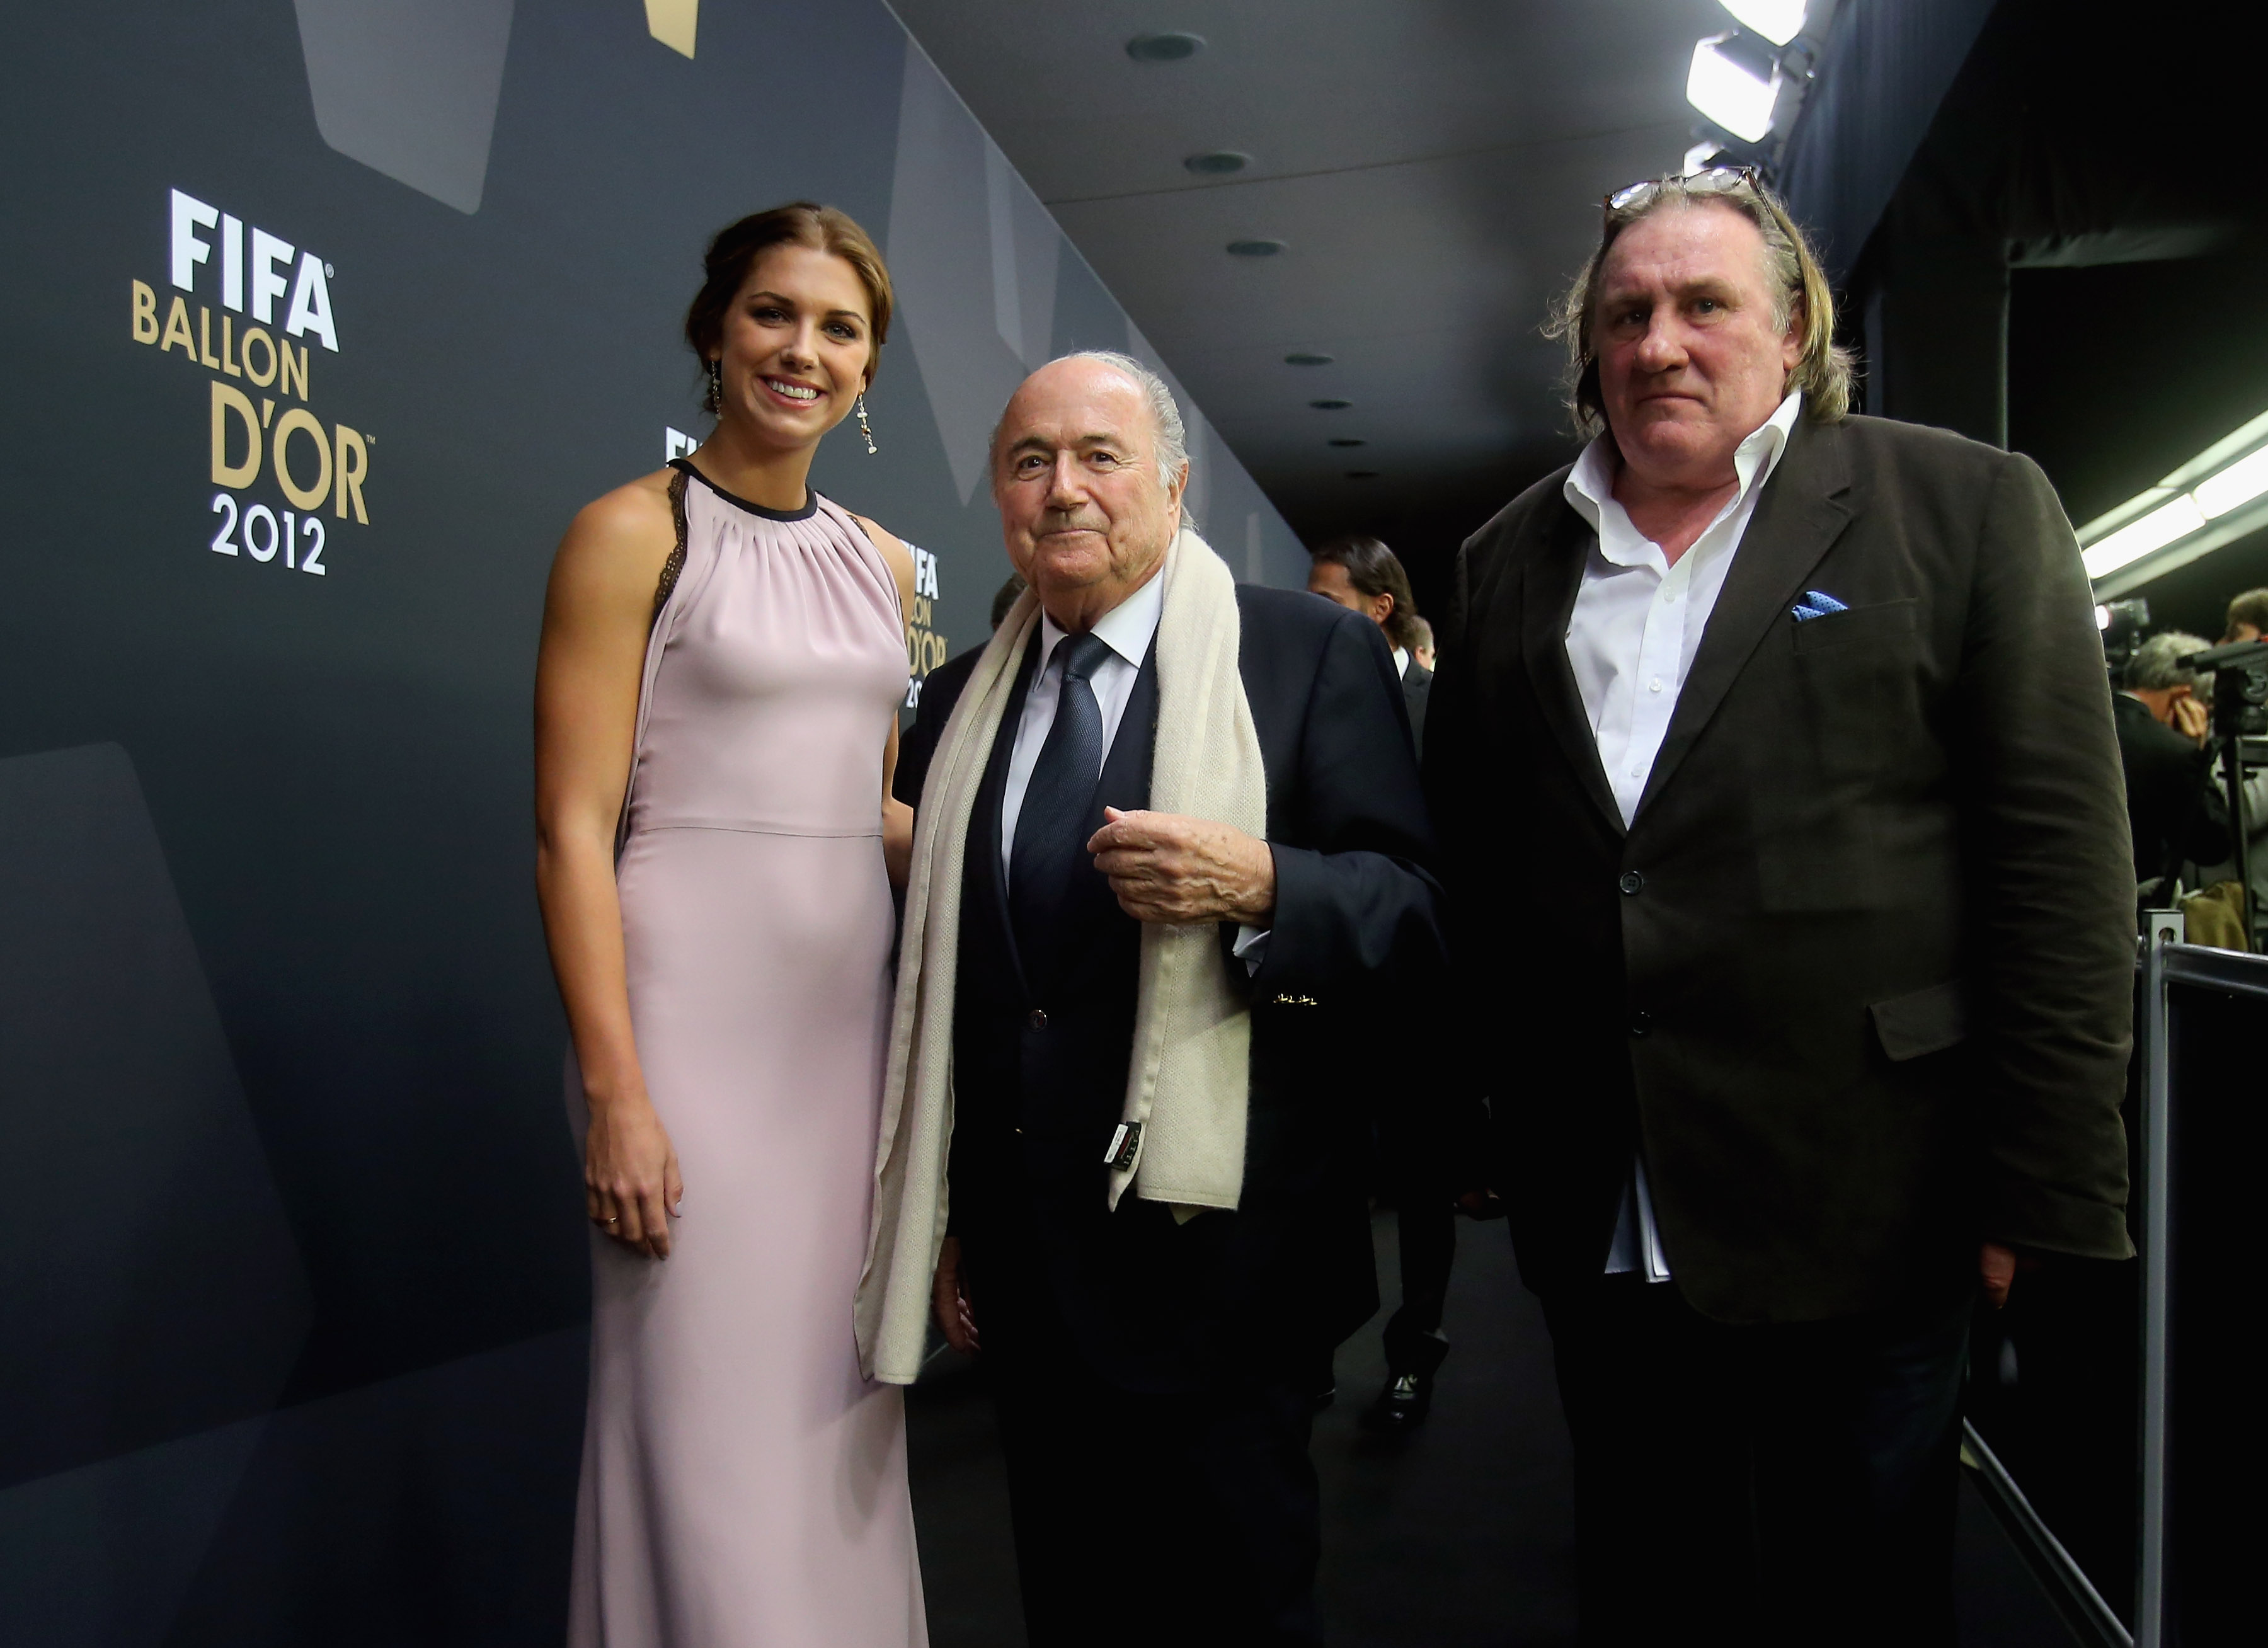 FIFA president Joseph S. Blatter, Alex Morgan and  French actor Gerard Depardieu during the red carpet arrivals at the FIFA Ballon d'Or Gala 2012 at the Kongresshaus on Jan. 7, 2013 in Zurich.